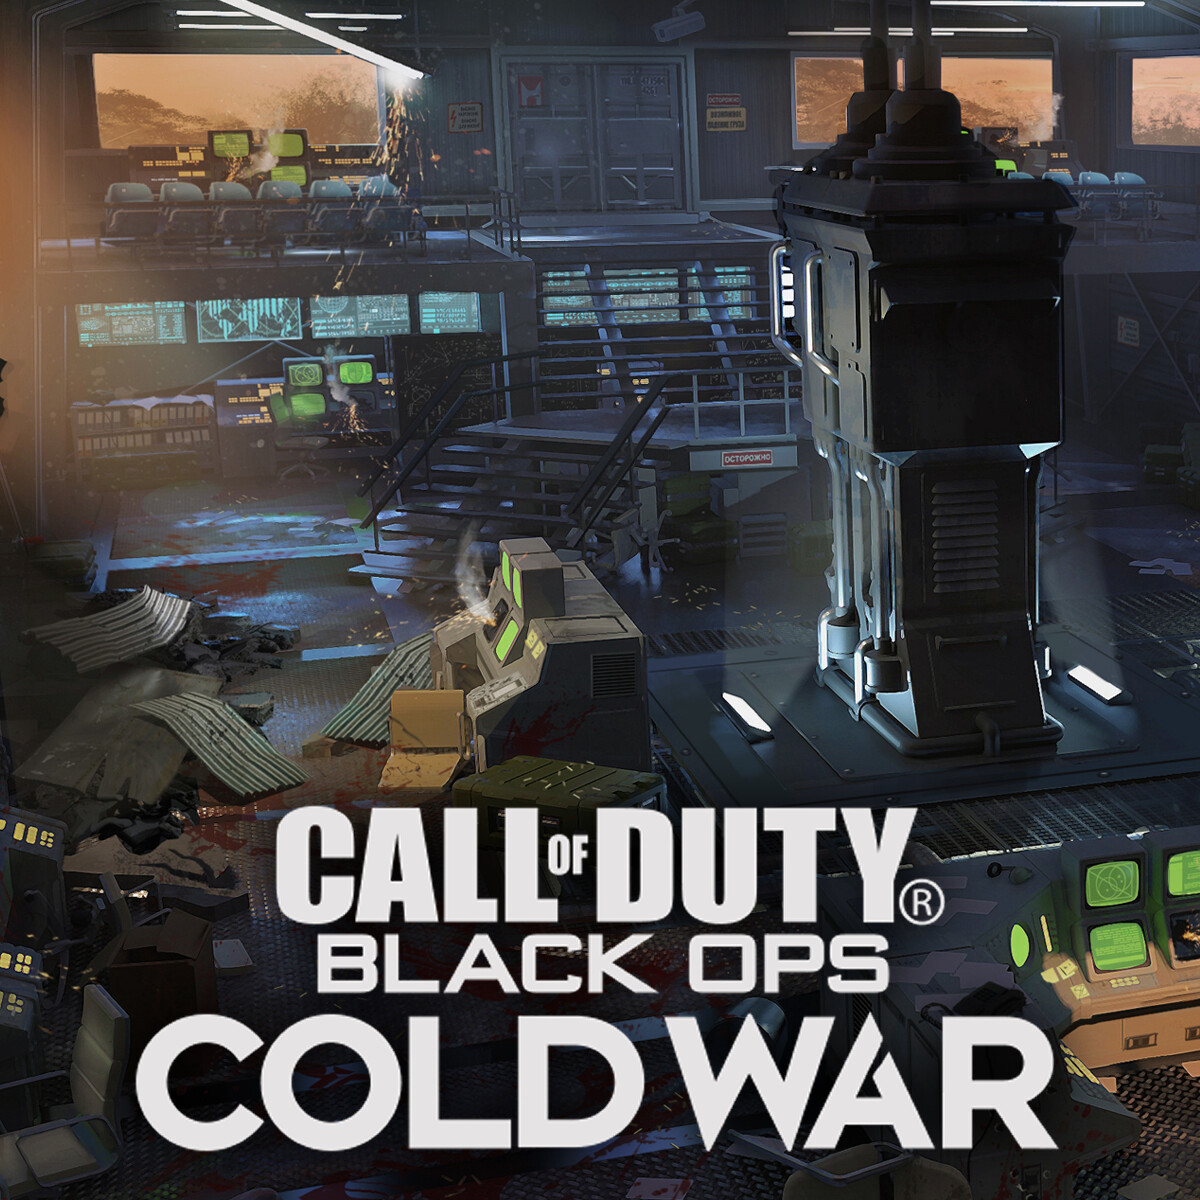 Gadget-Bot Productions - Call of Duty: Black Ops Cold War // Mission  Control Environment